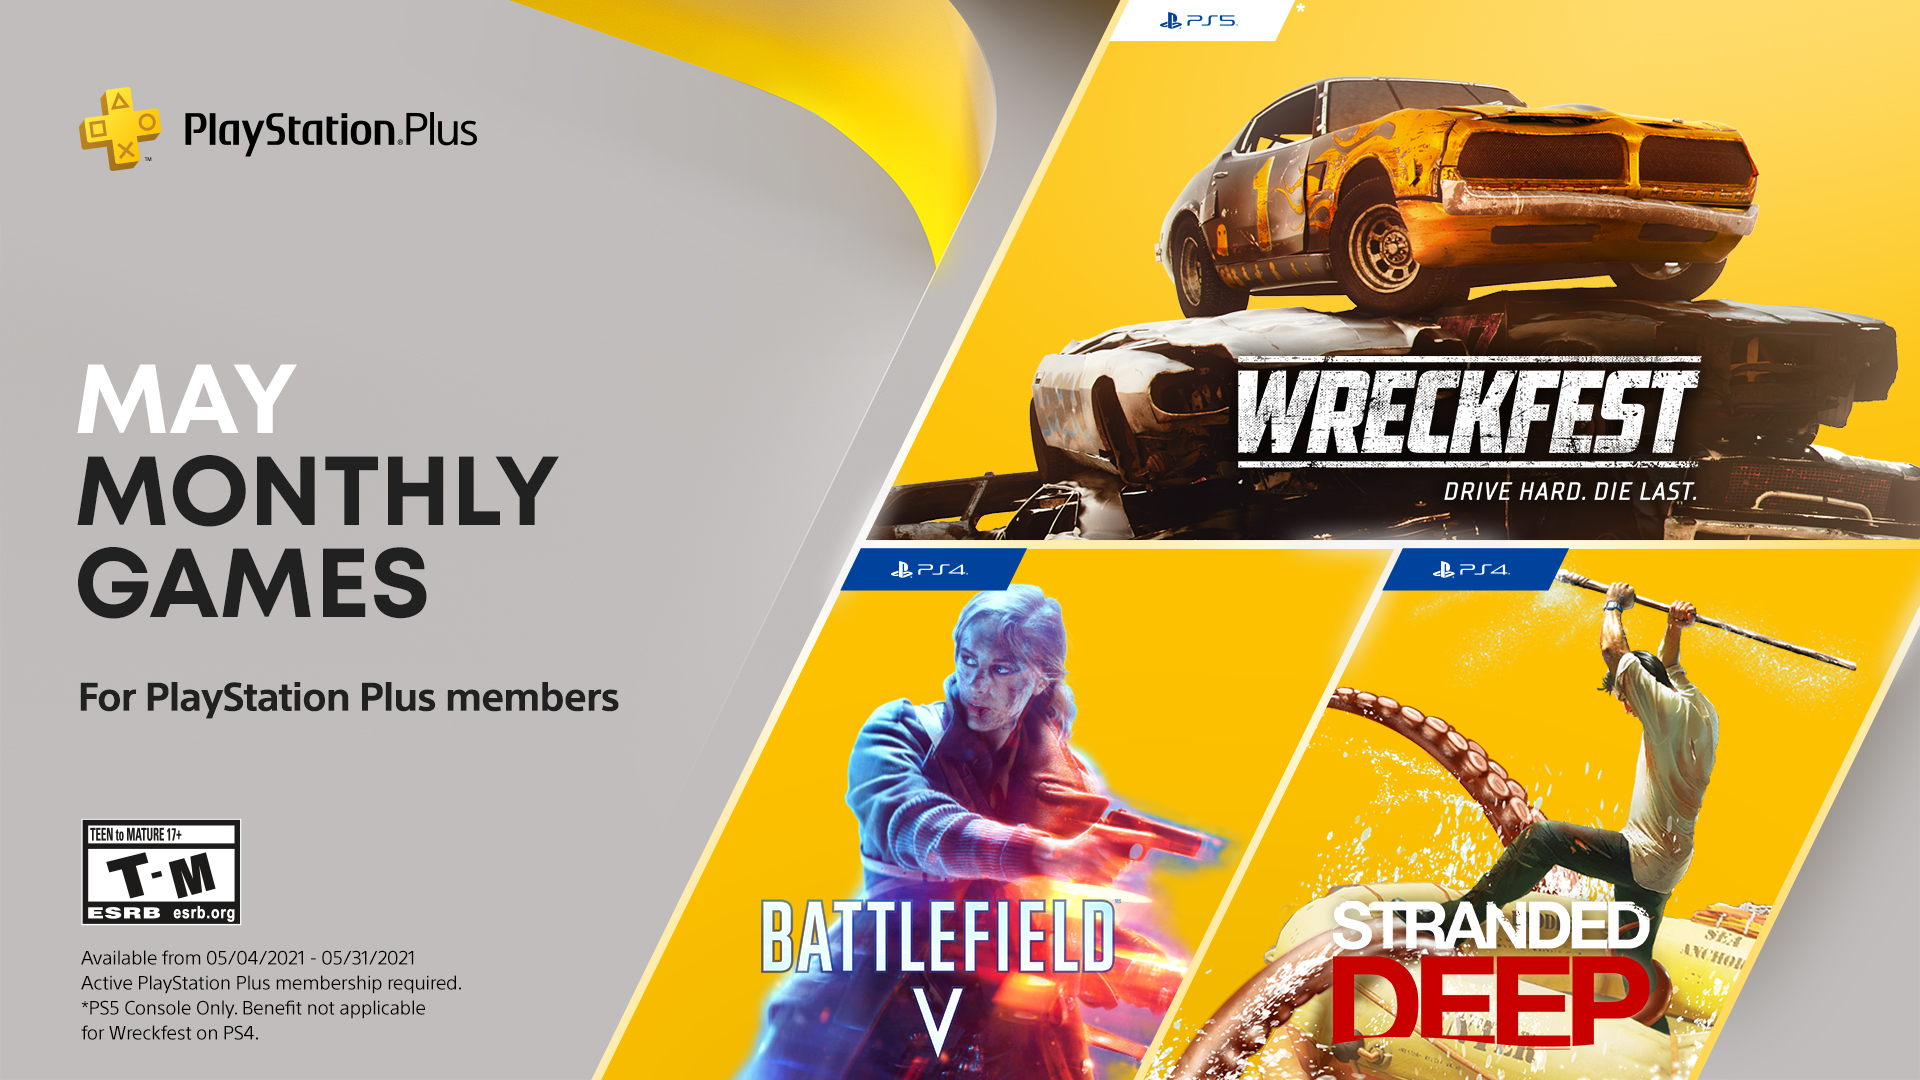 all playstation plus free games